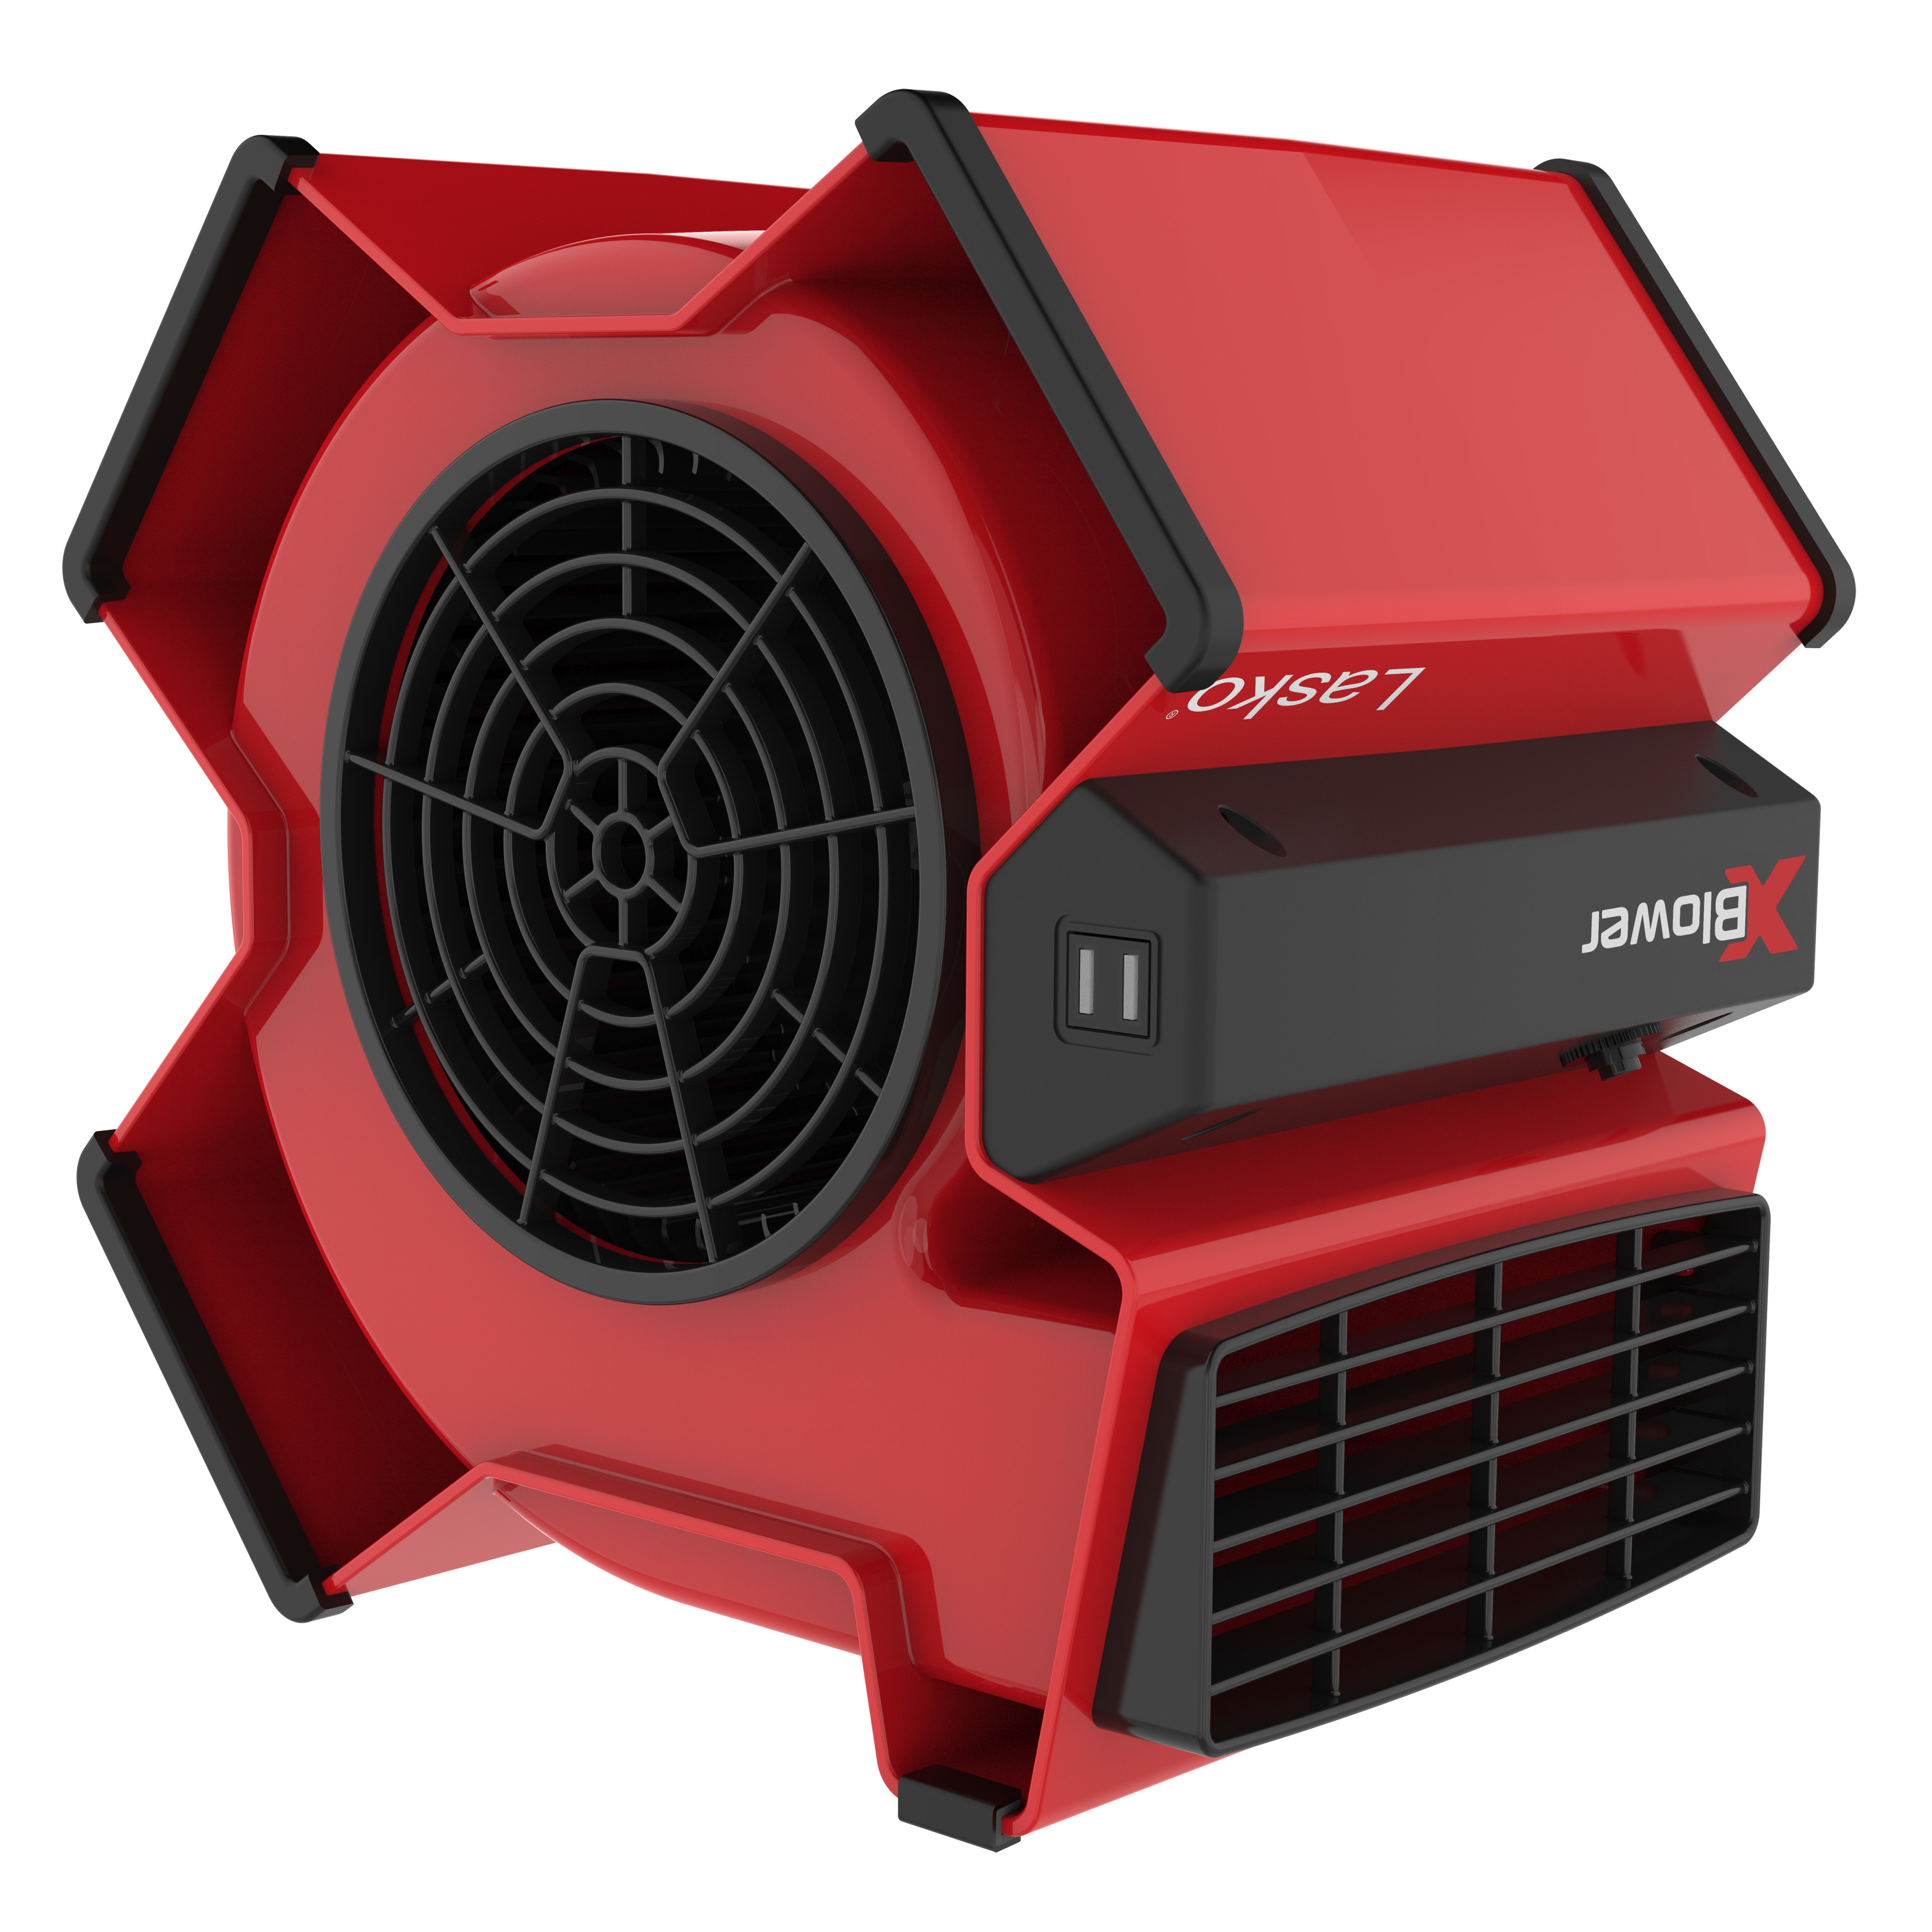 Lasko 11" X-Blower Multi-Position Utility Blower Fan with USB Port, Red, X12900, New - image 3 of 5